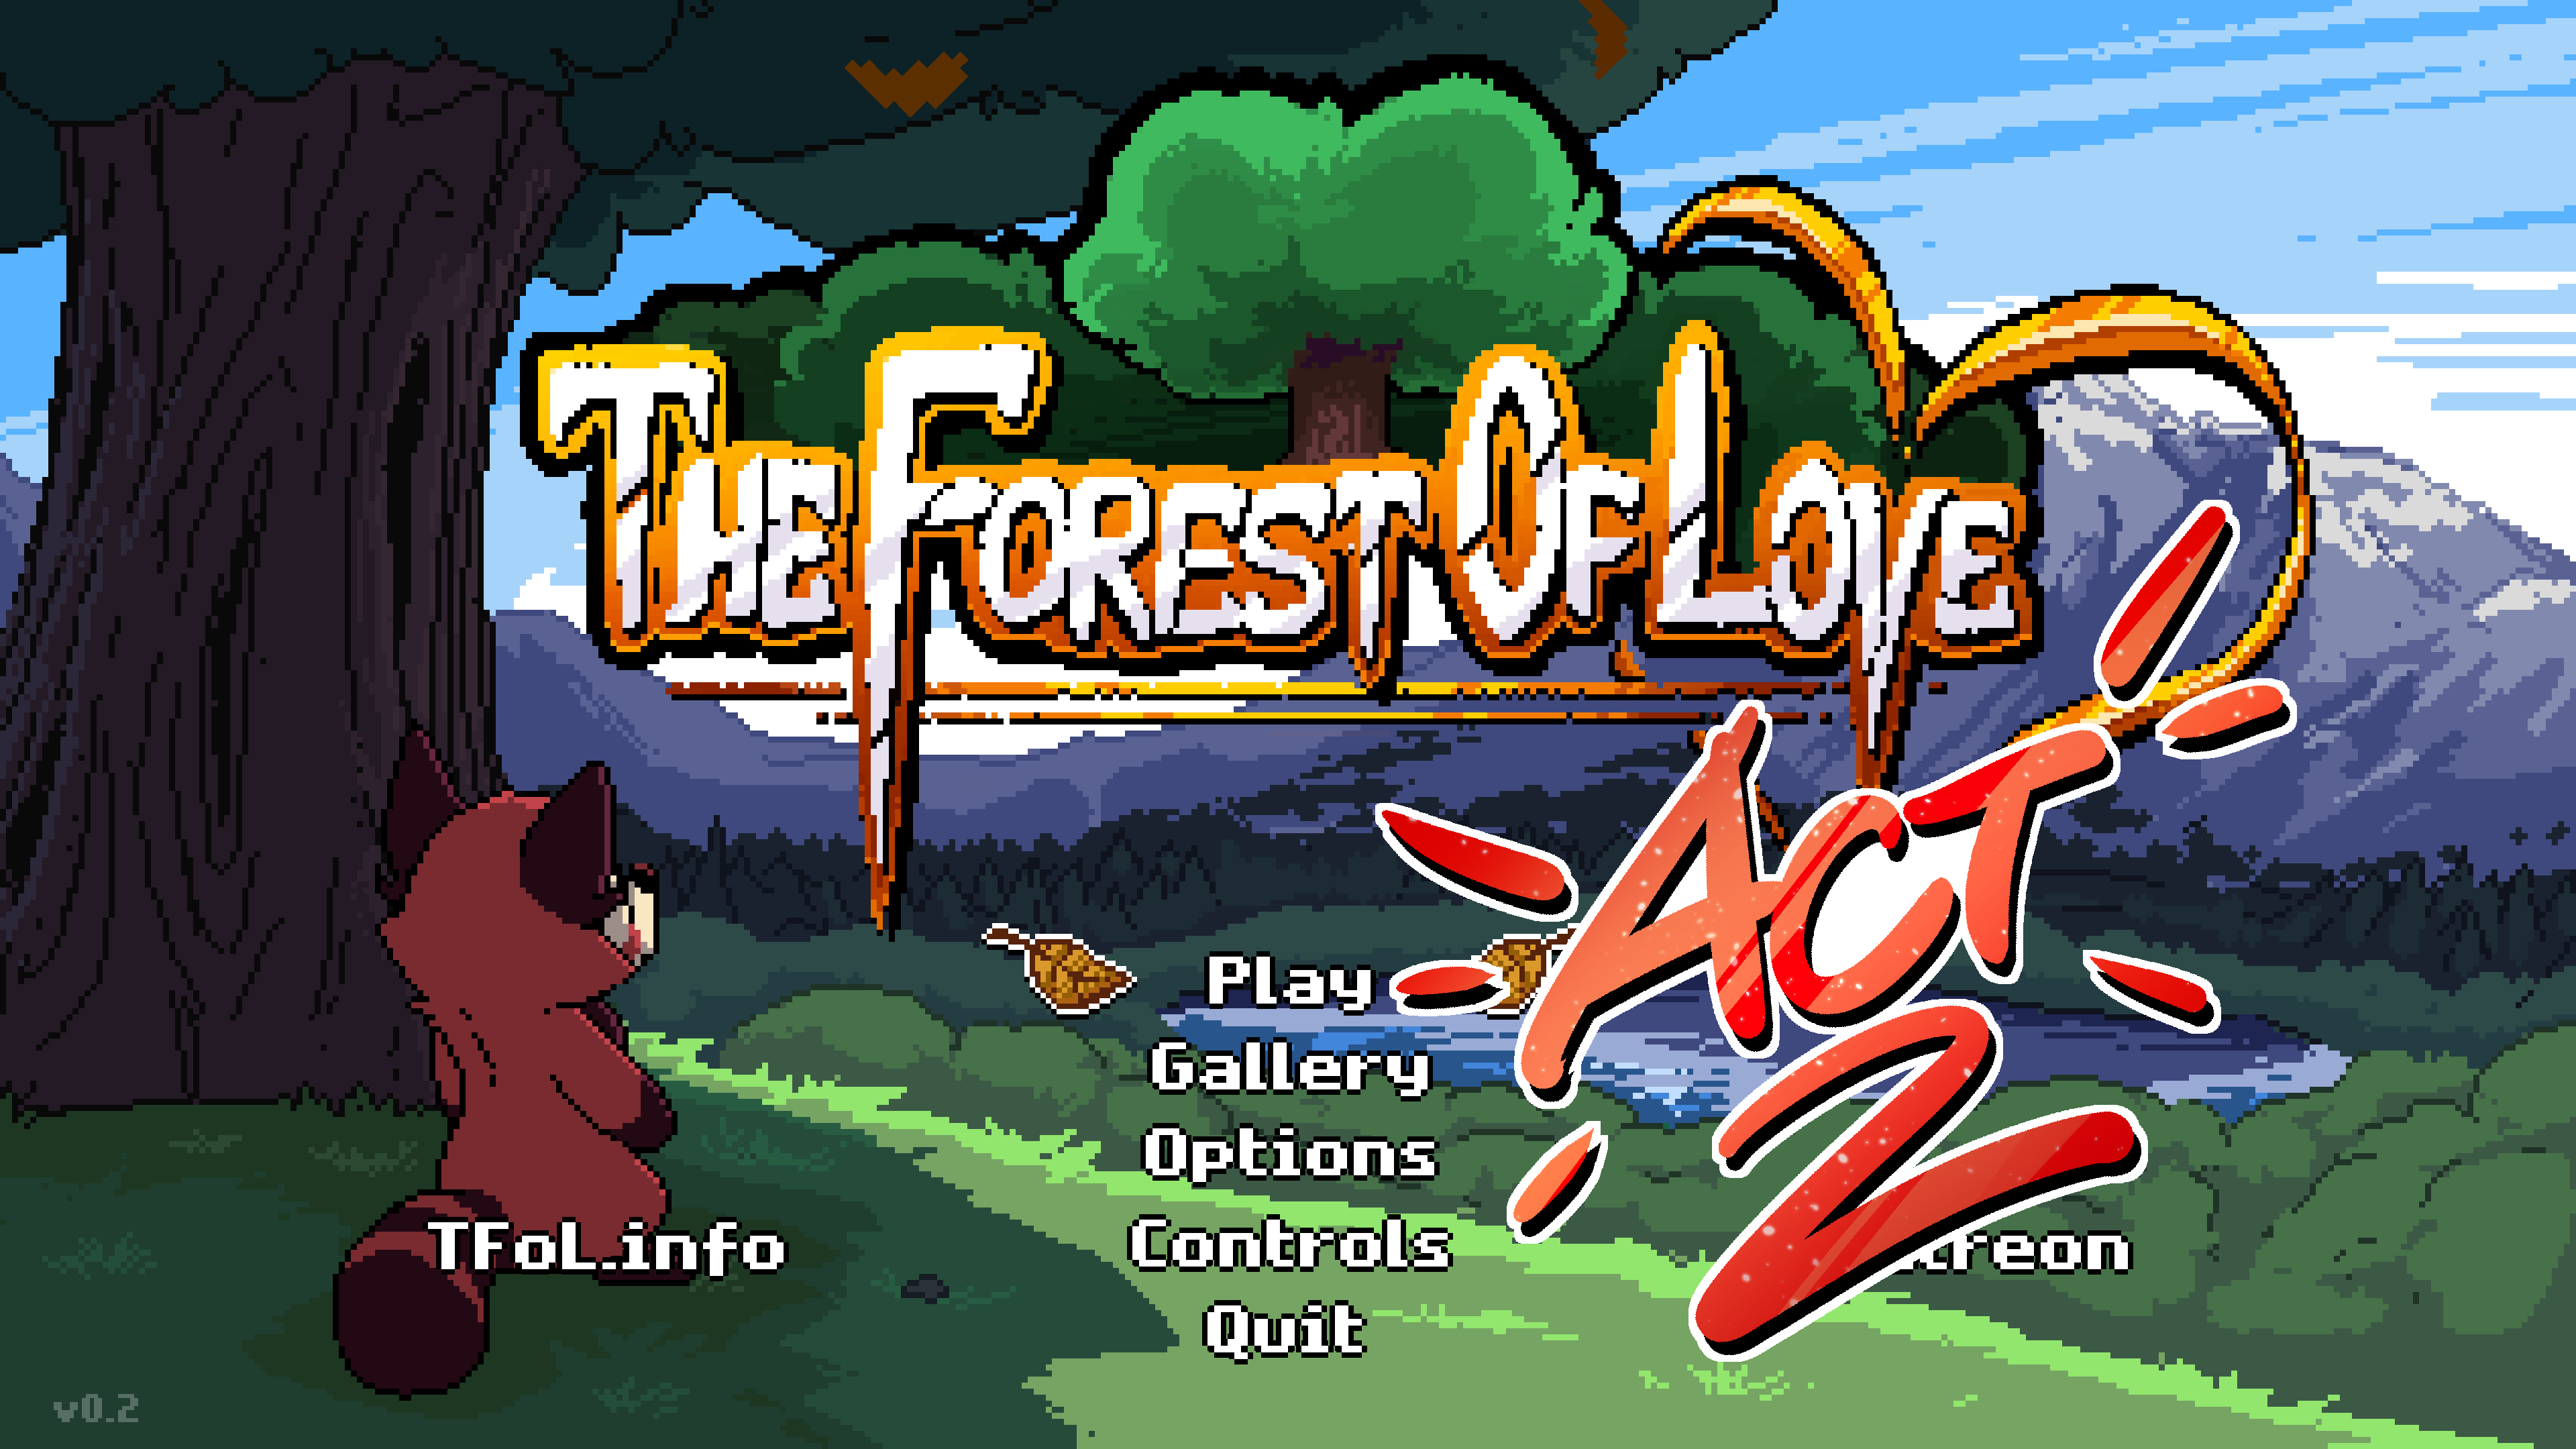 N 7 Hentai Furry True Love - The Forest of Love by Carrot